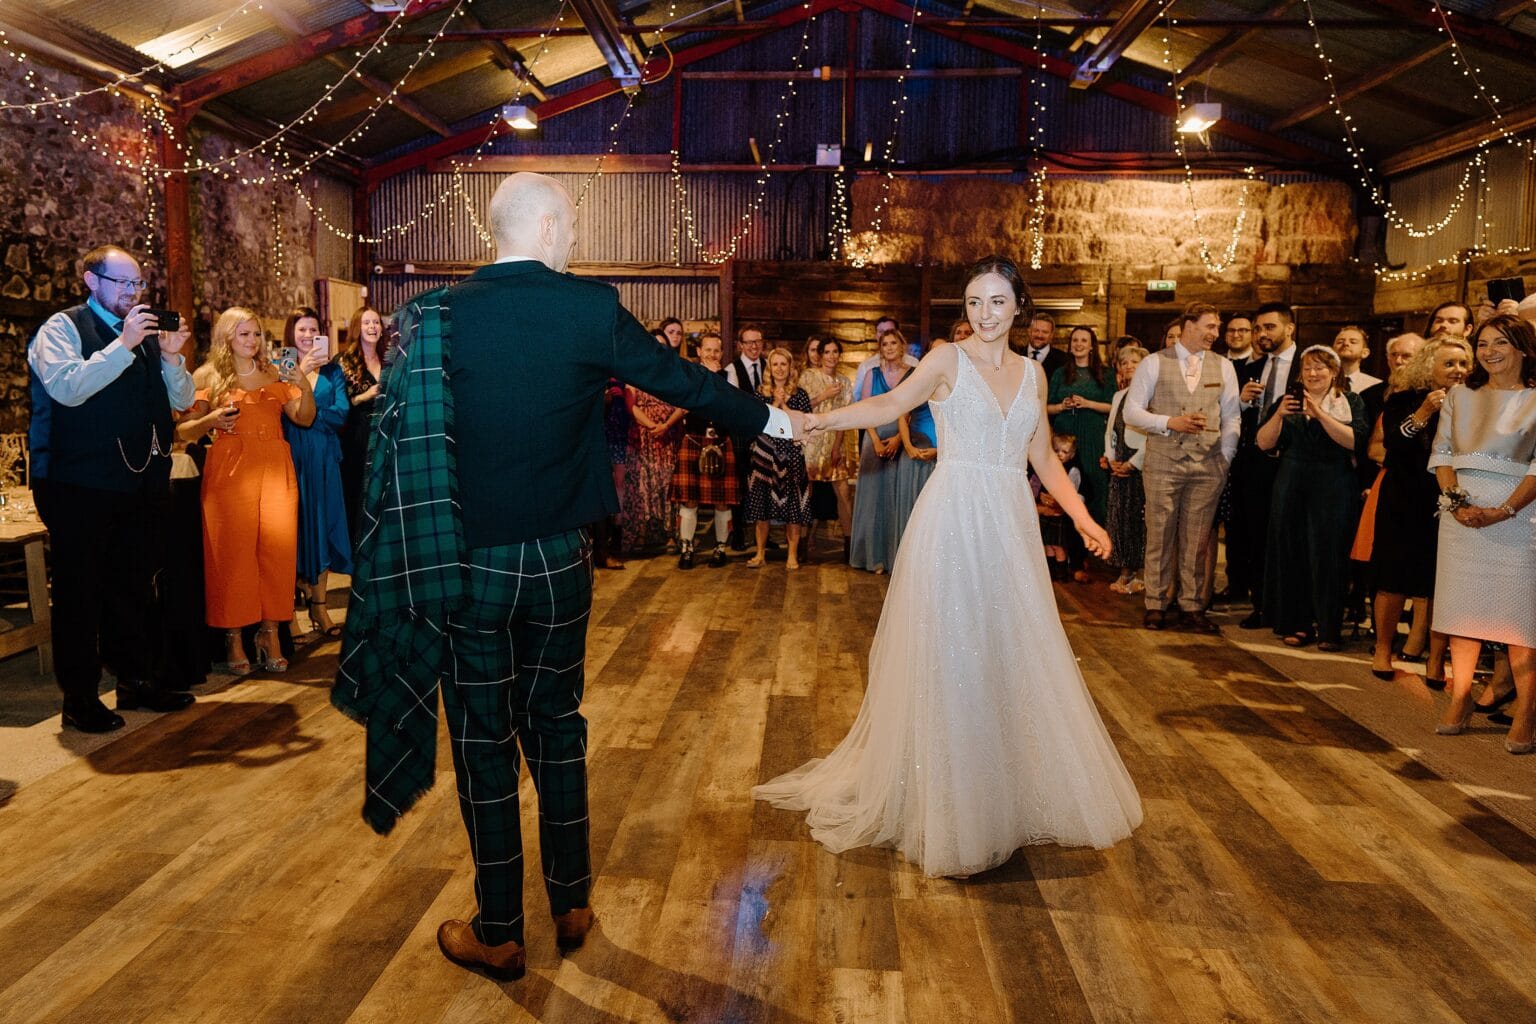 at their farm wedding venues scotland the bride and groom take the floor for their first dance as guests look on beneath festoon lighting